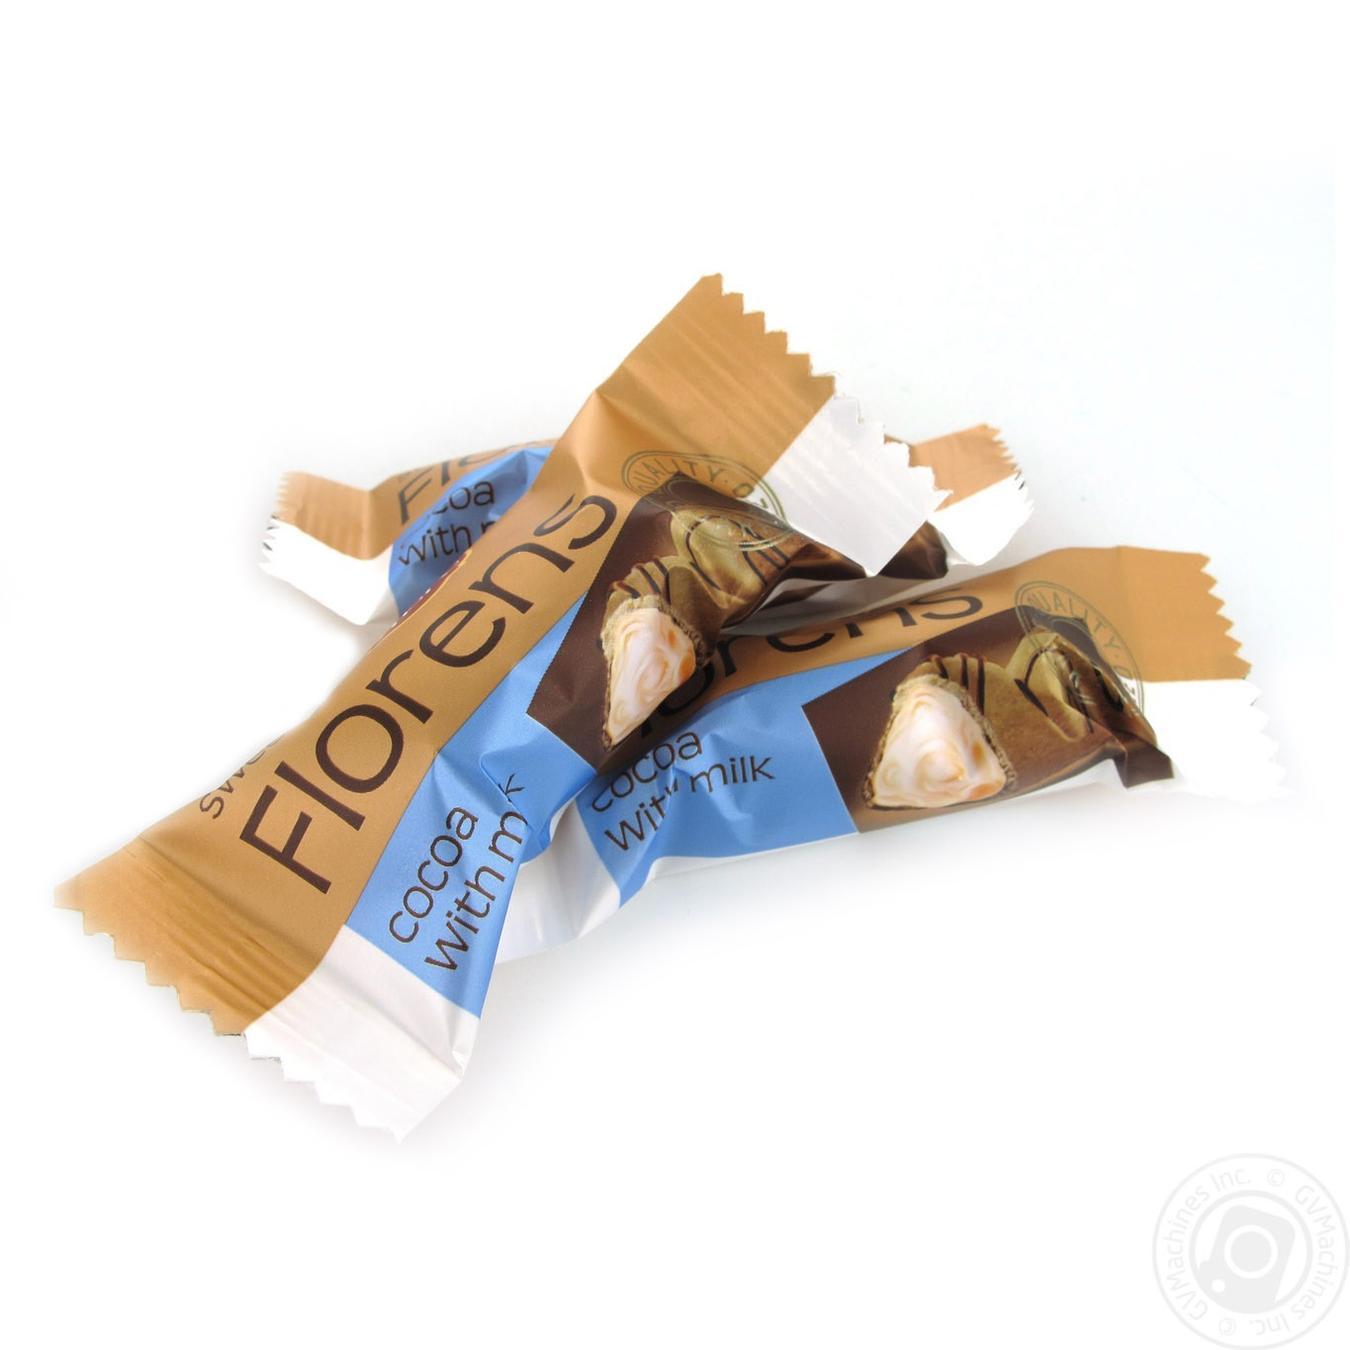 AVK Florence candies cocoa with milk weight